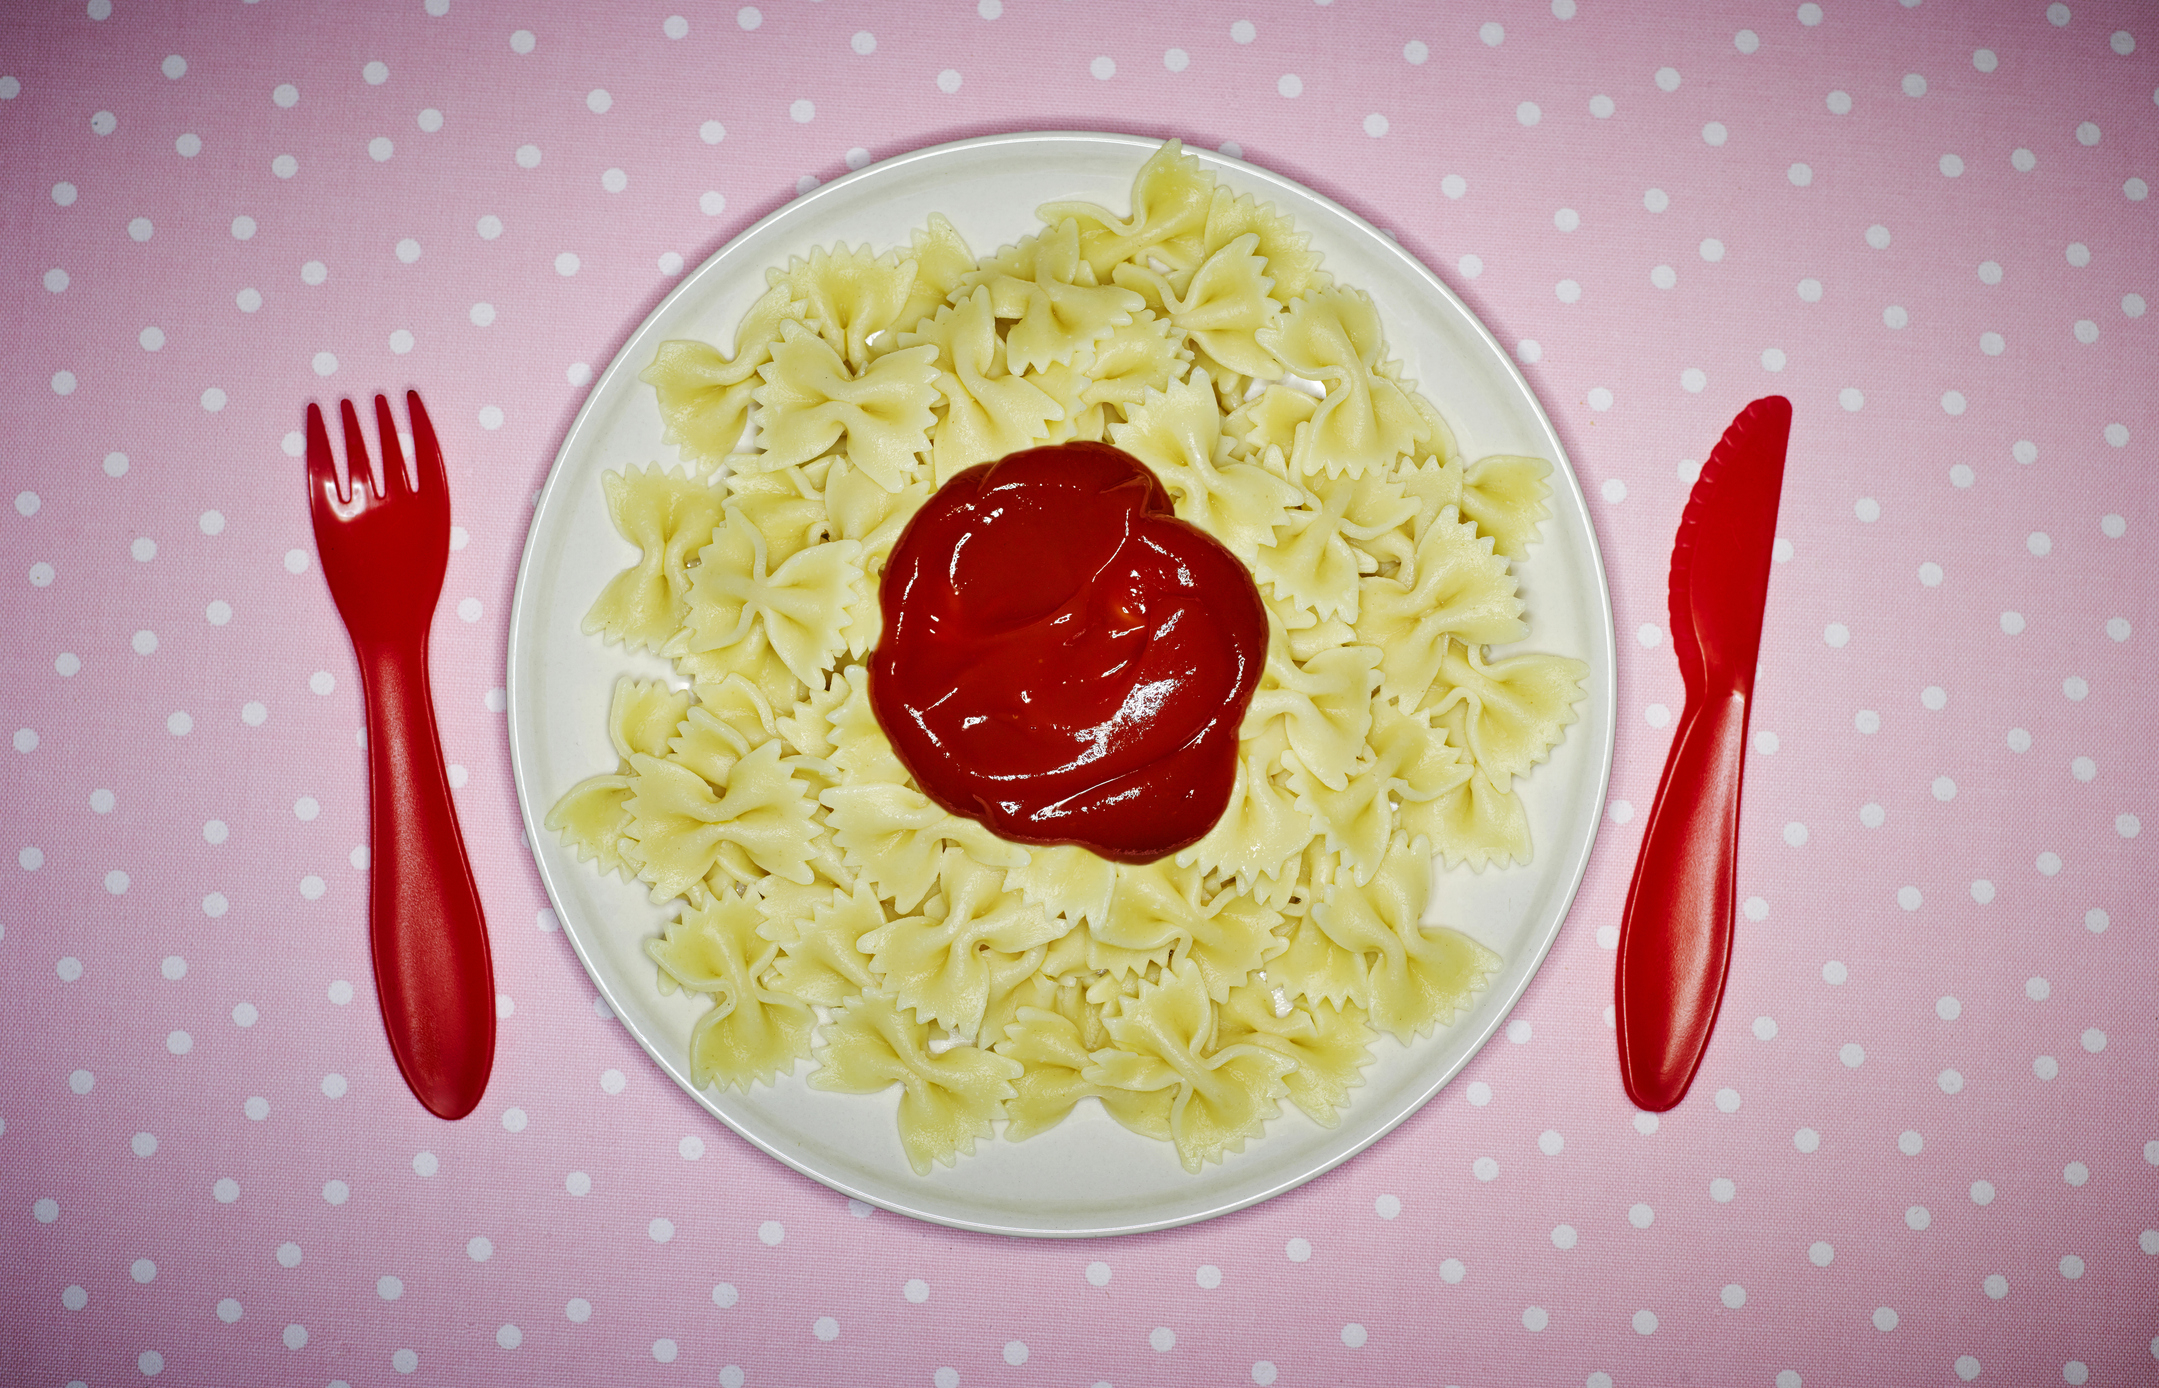 Plate of pasta with a dollop of sauce, flanked by plastic fork and knife on a dotted surface